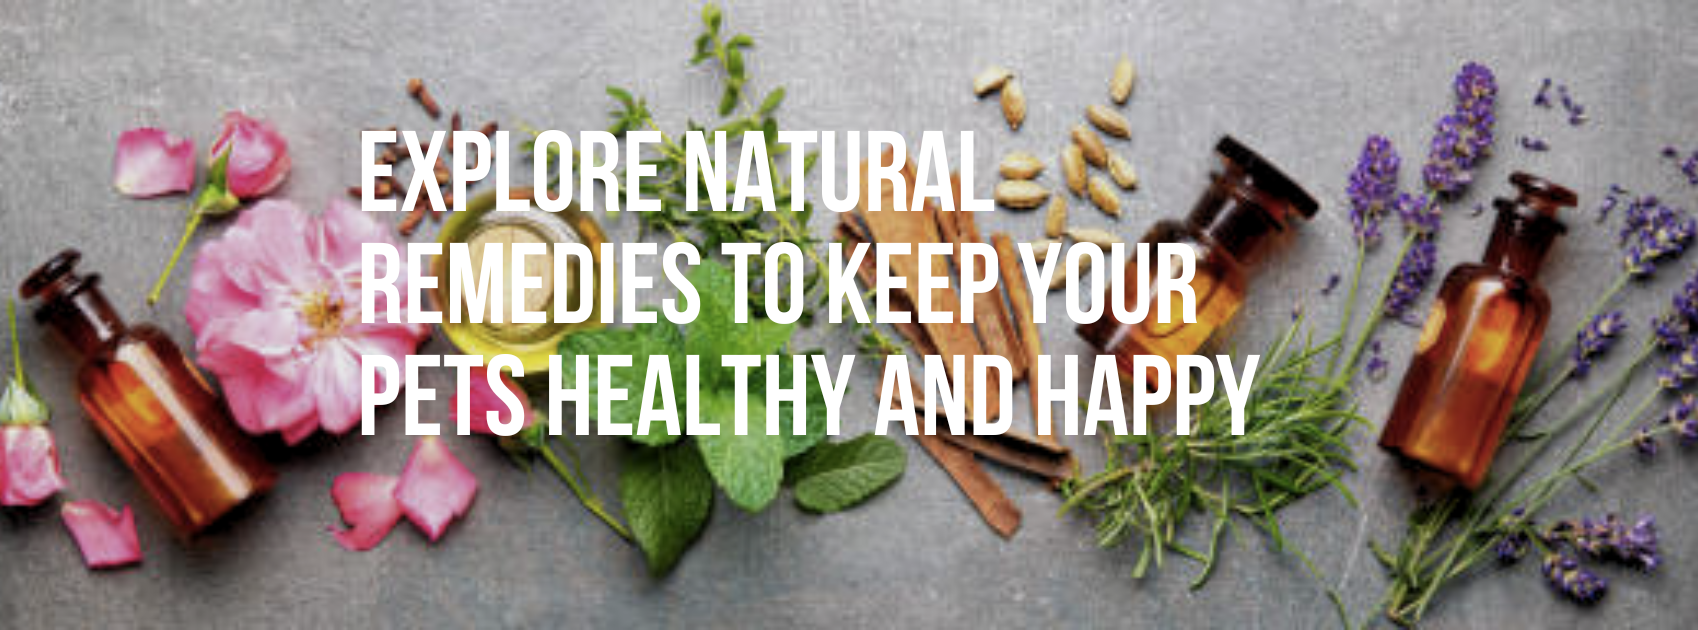 Explore Natural Remedies to Keep Your Pets Healthy and Happy